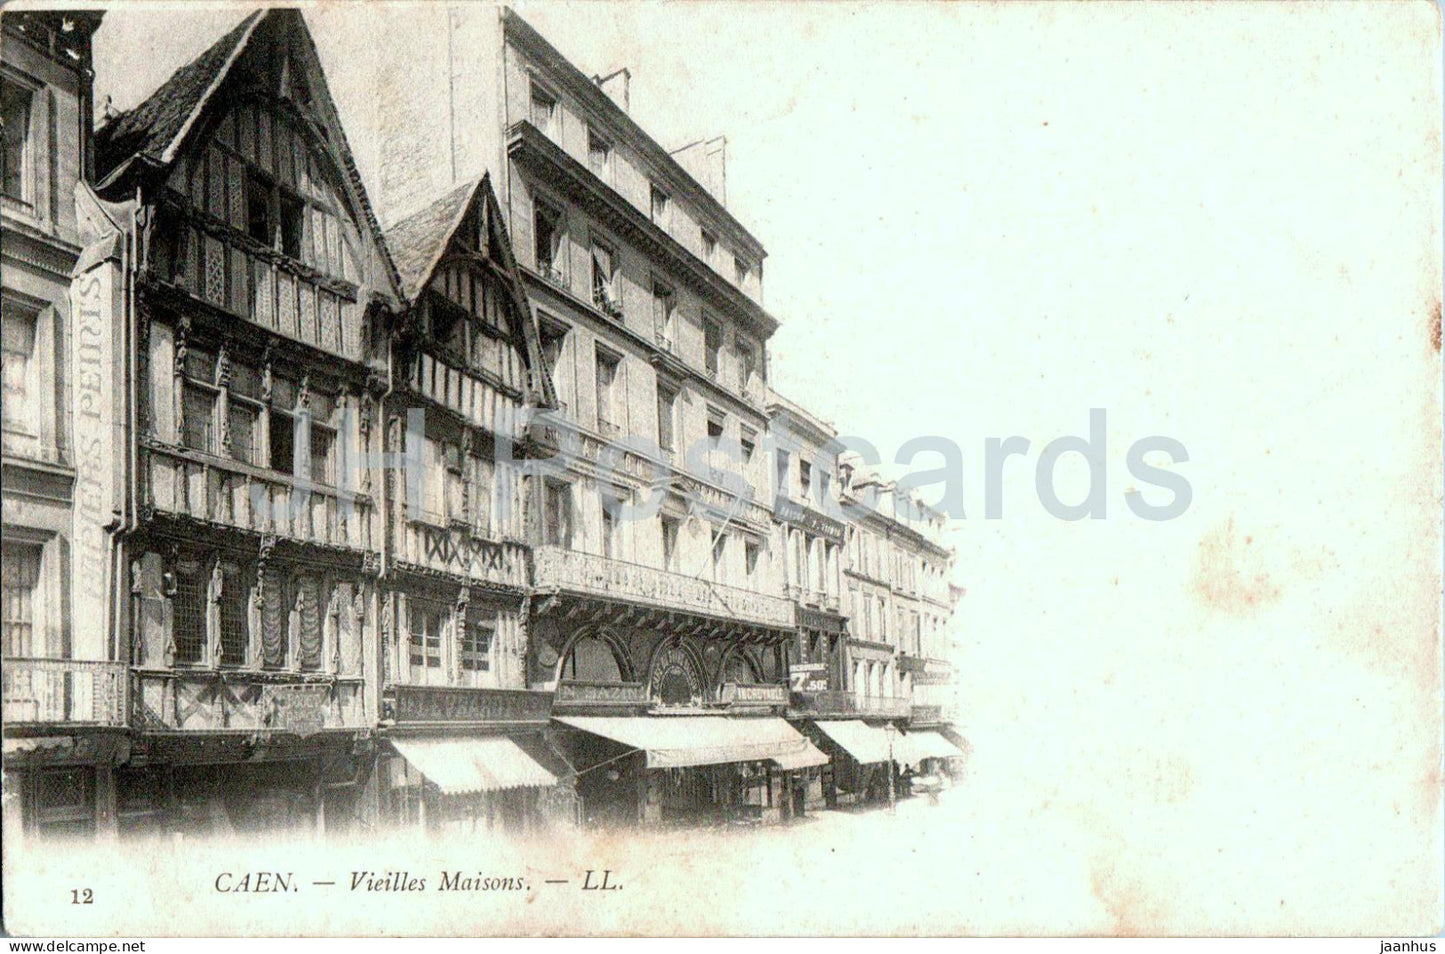 Caen - Vieilles Maisons - old houses - 12 - old postcard - France - unused - JH Postcards